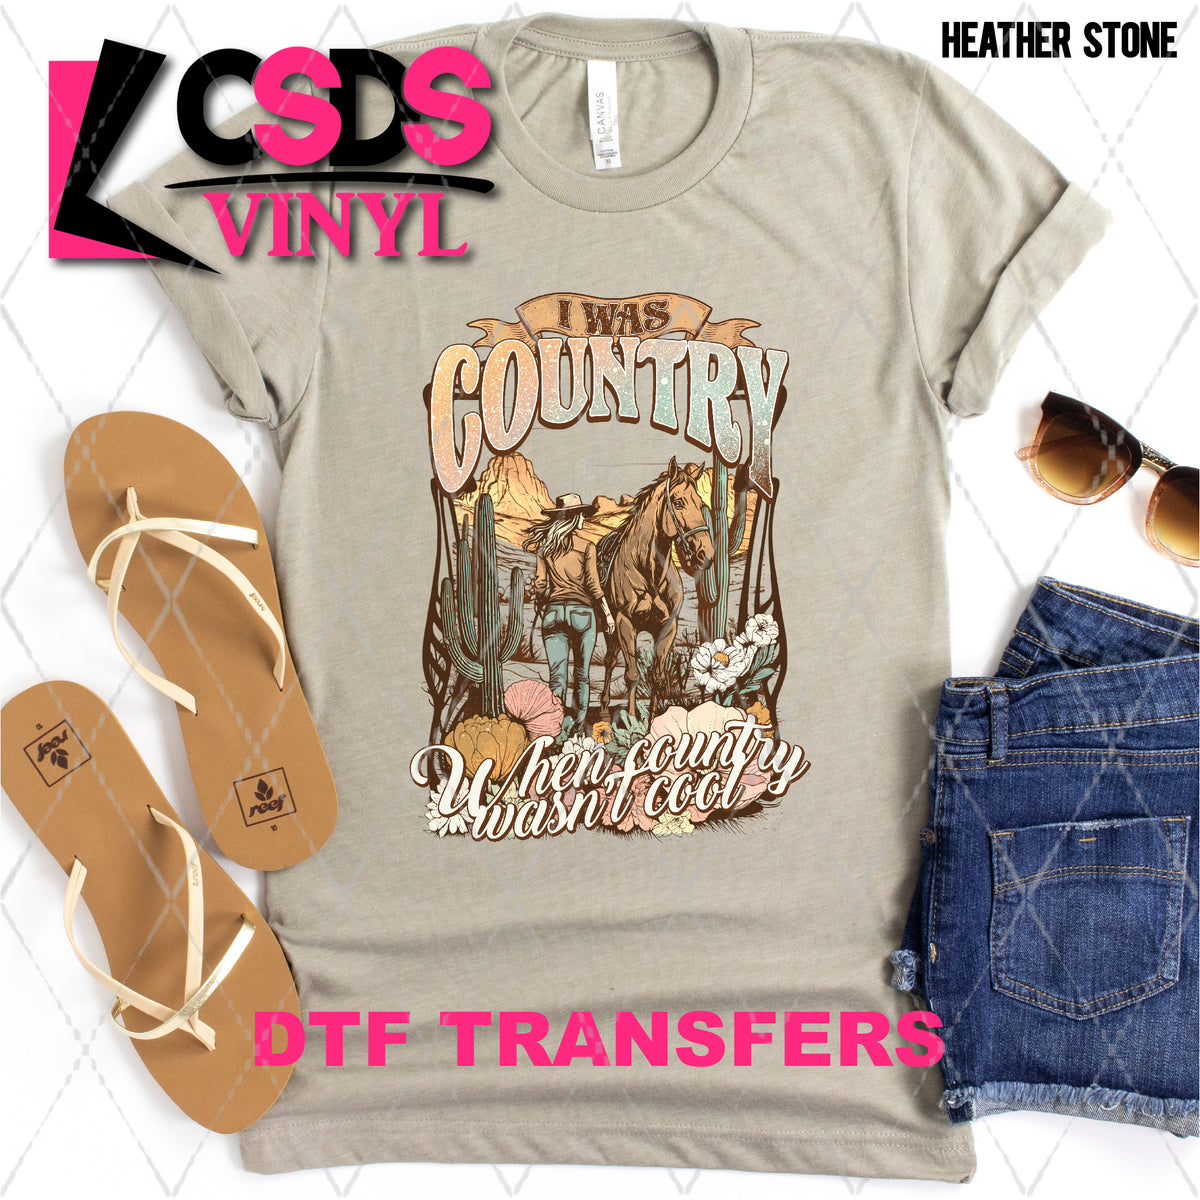 Shirts made with Heat Transfer Vinyl vs. DTF Transfers {HTV vs. DTF} -  Keeping it Simple